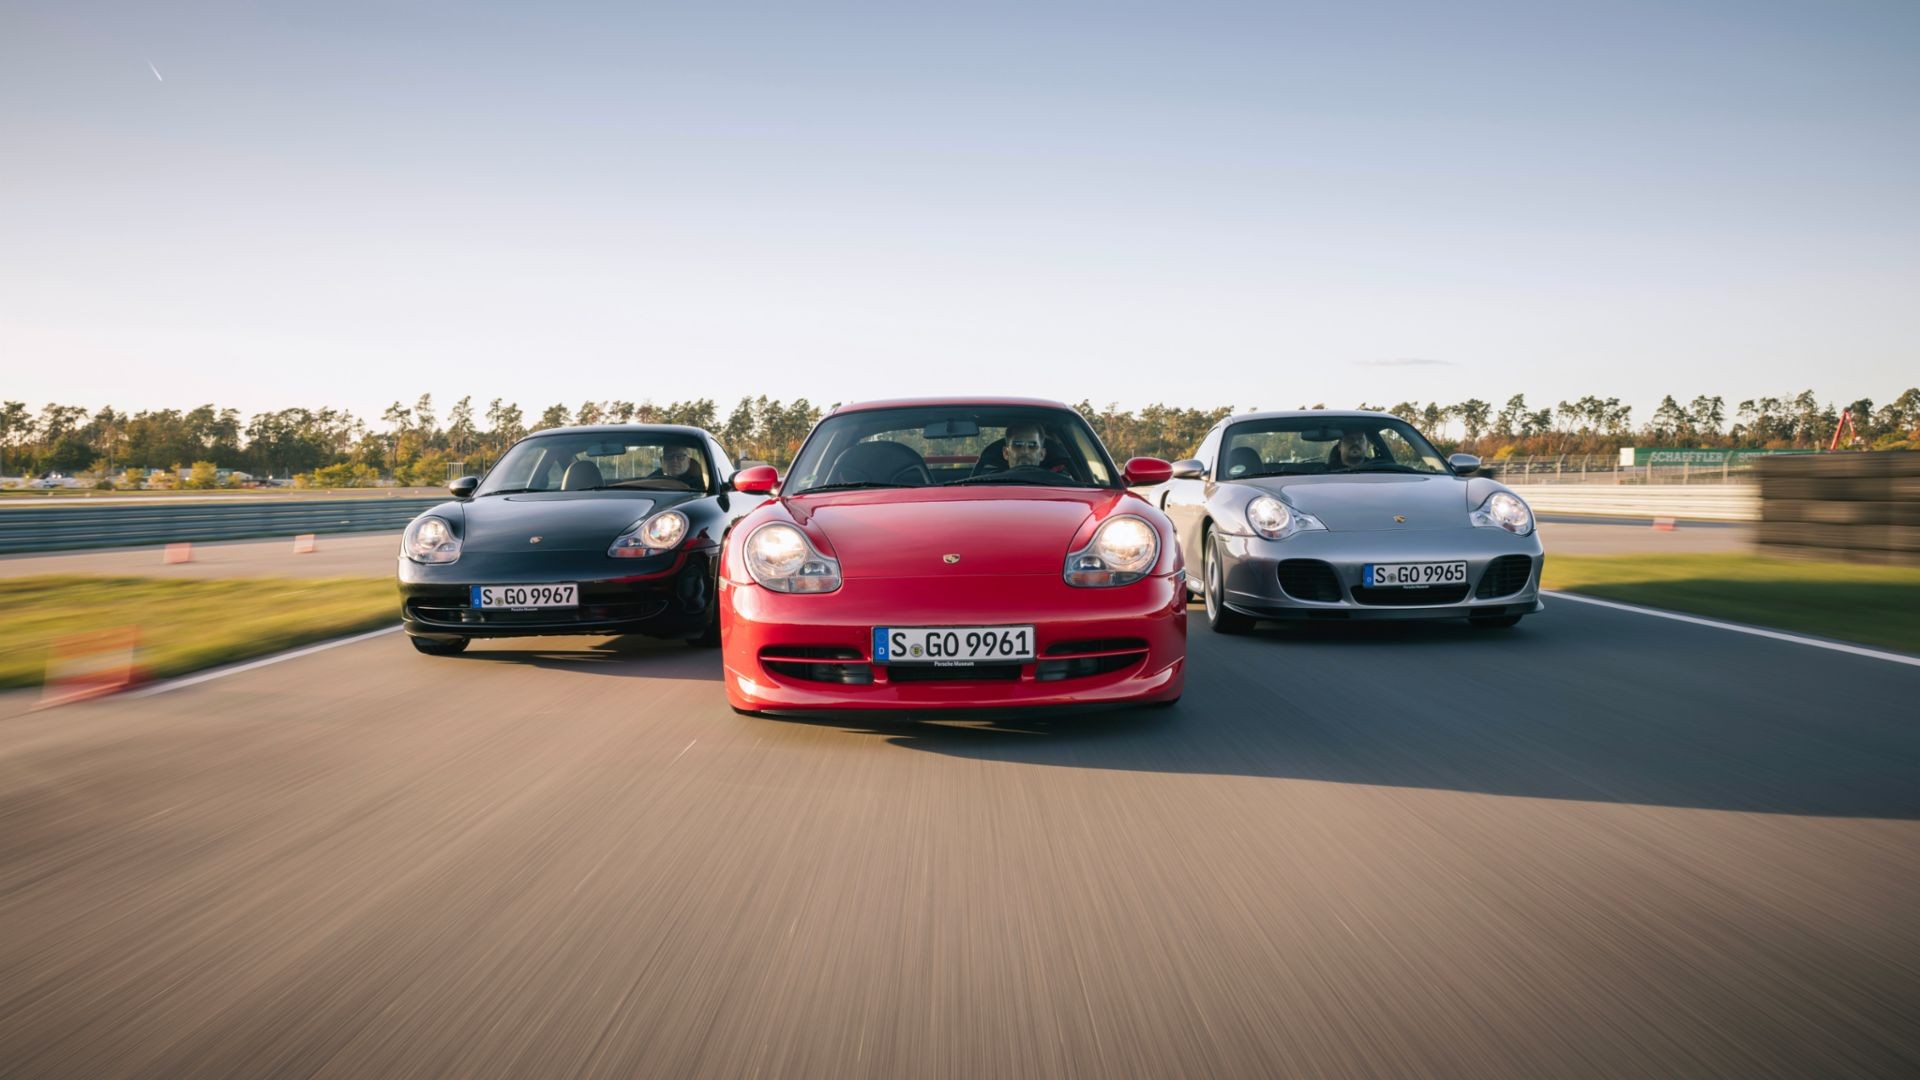 The Definitive Guide To The Porsche 996 M96 Engines